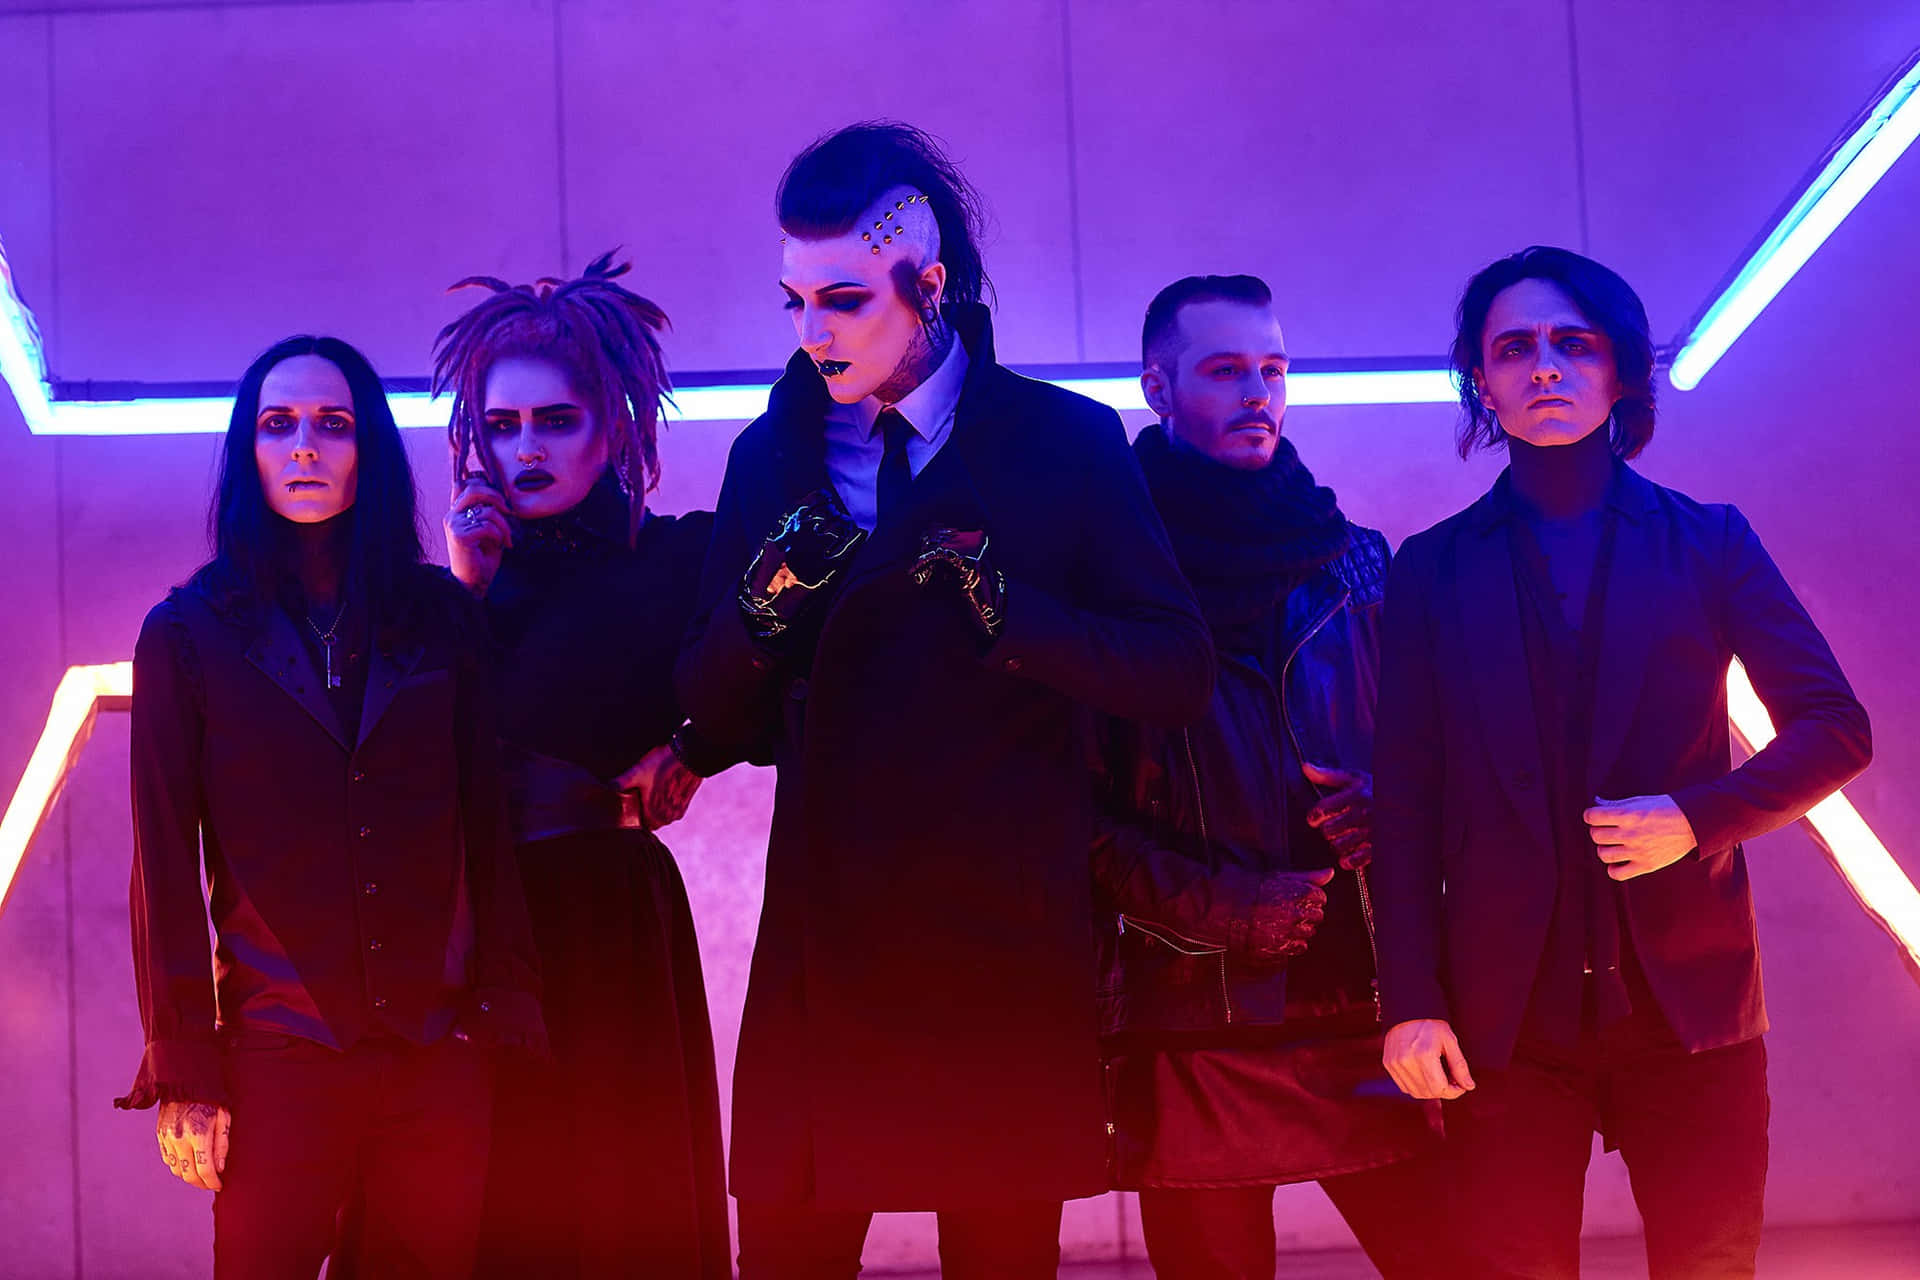 Motionless In White Band Neon Backdrop Wallpaper